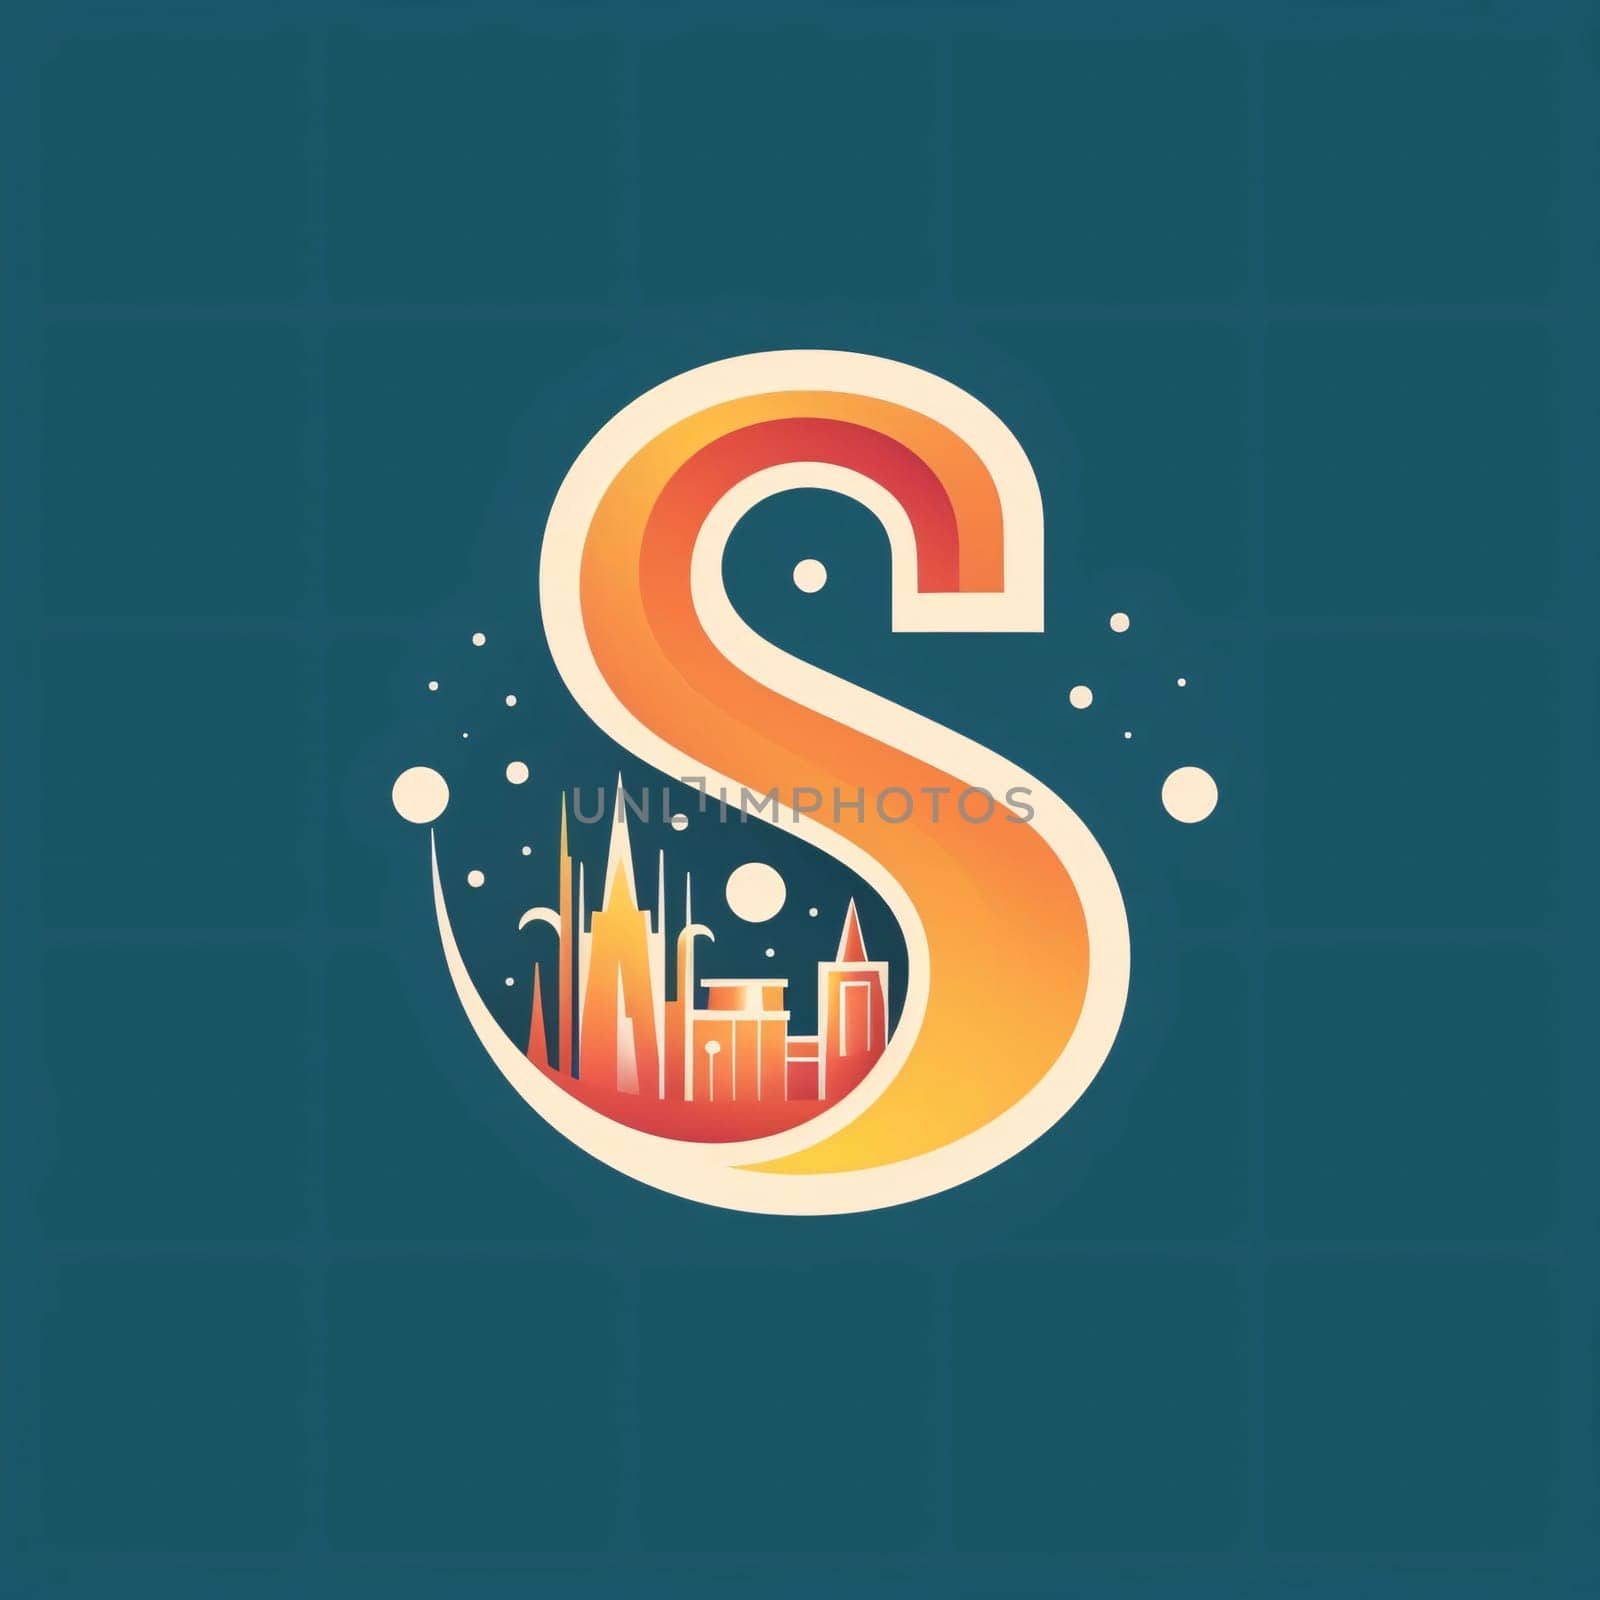 Letter S logo icon design template elements for your application or corporate identity. by ThemesS